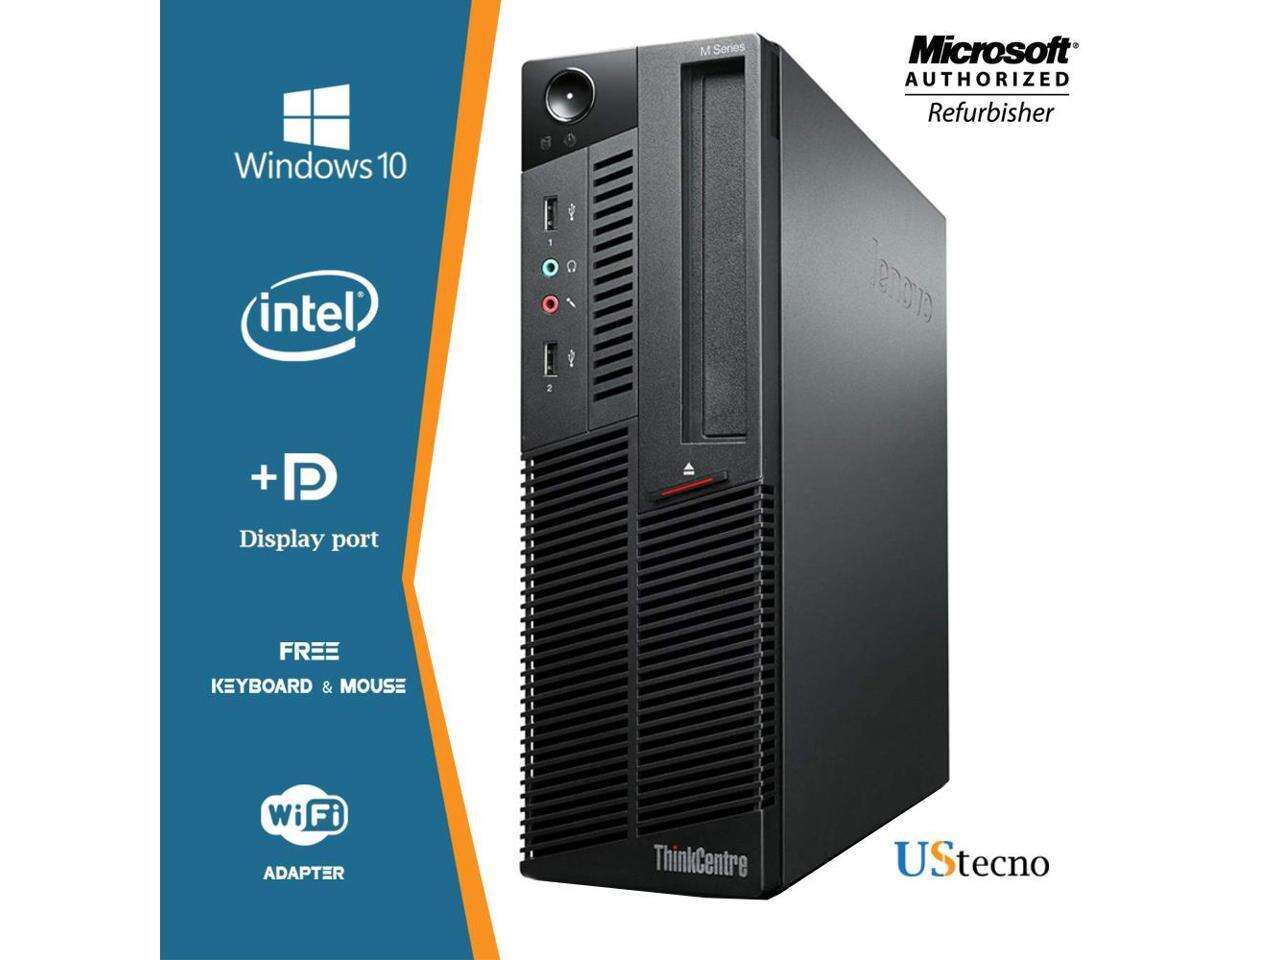 Lenovo ThinkCentre M90p SFF Desktop Computer Intel Core i5 650 (3.2GHz) 8GB DDR3 New 256GB SSD DVD Windows 10 Home New Free Keyboard, Mouse,Power cord,WiFi Adapter